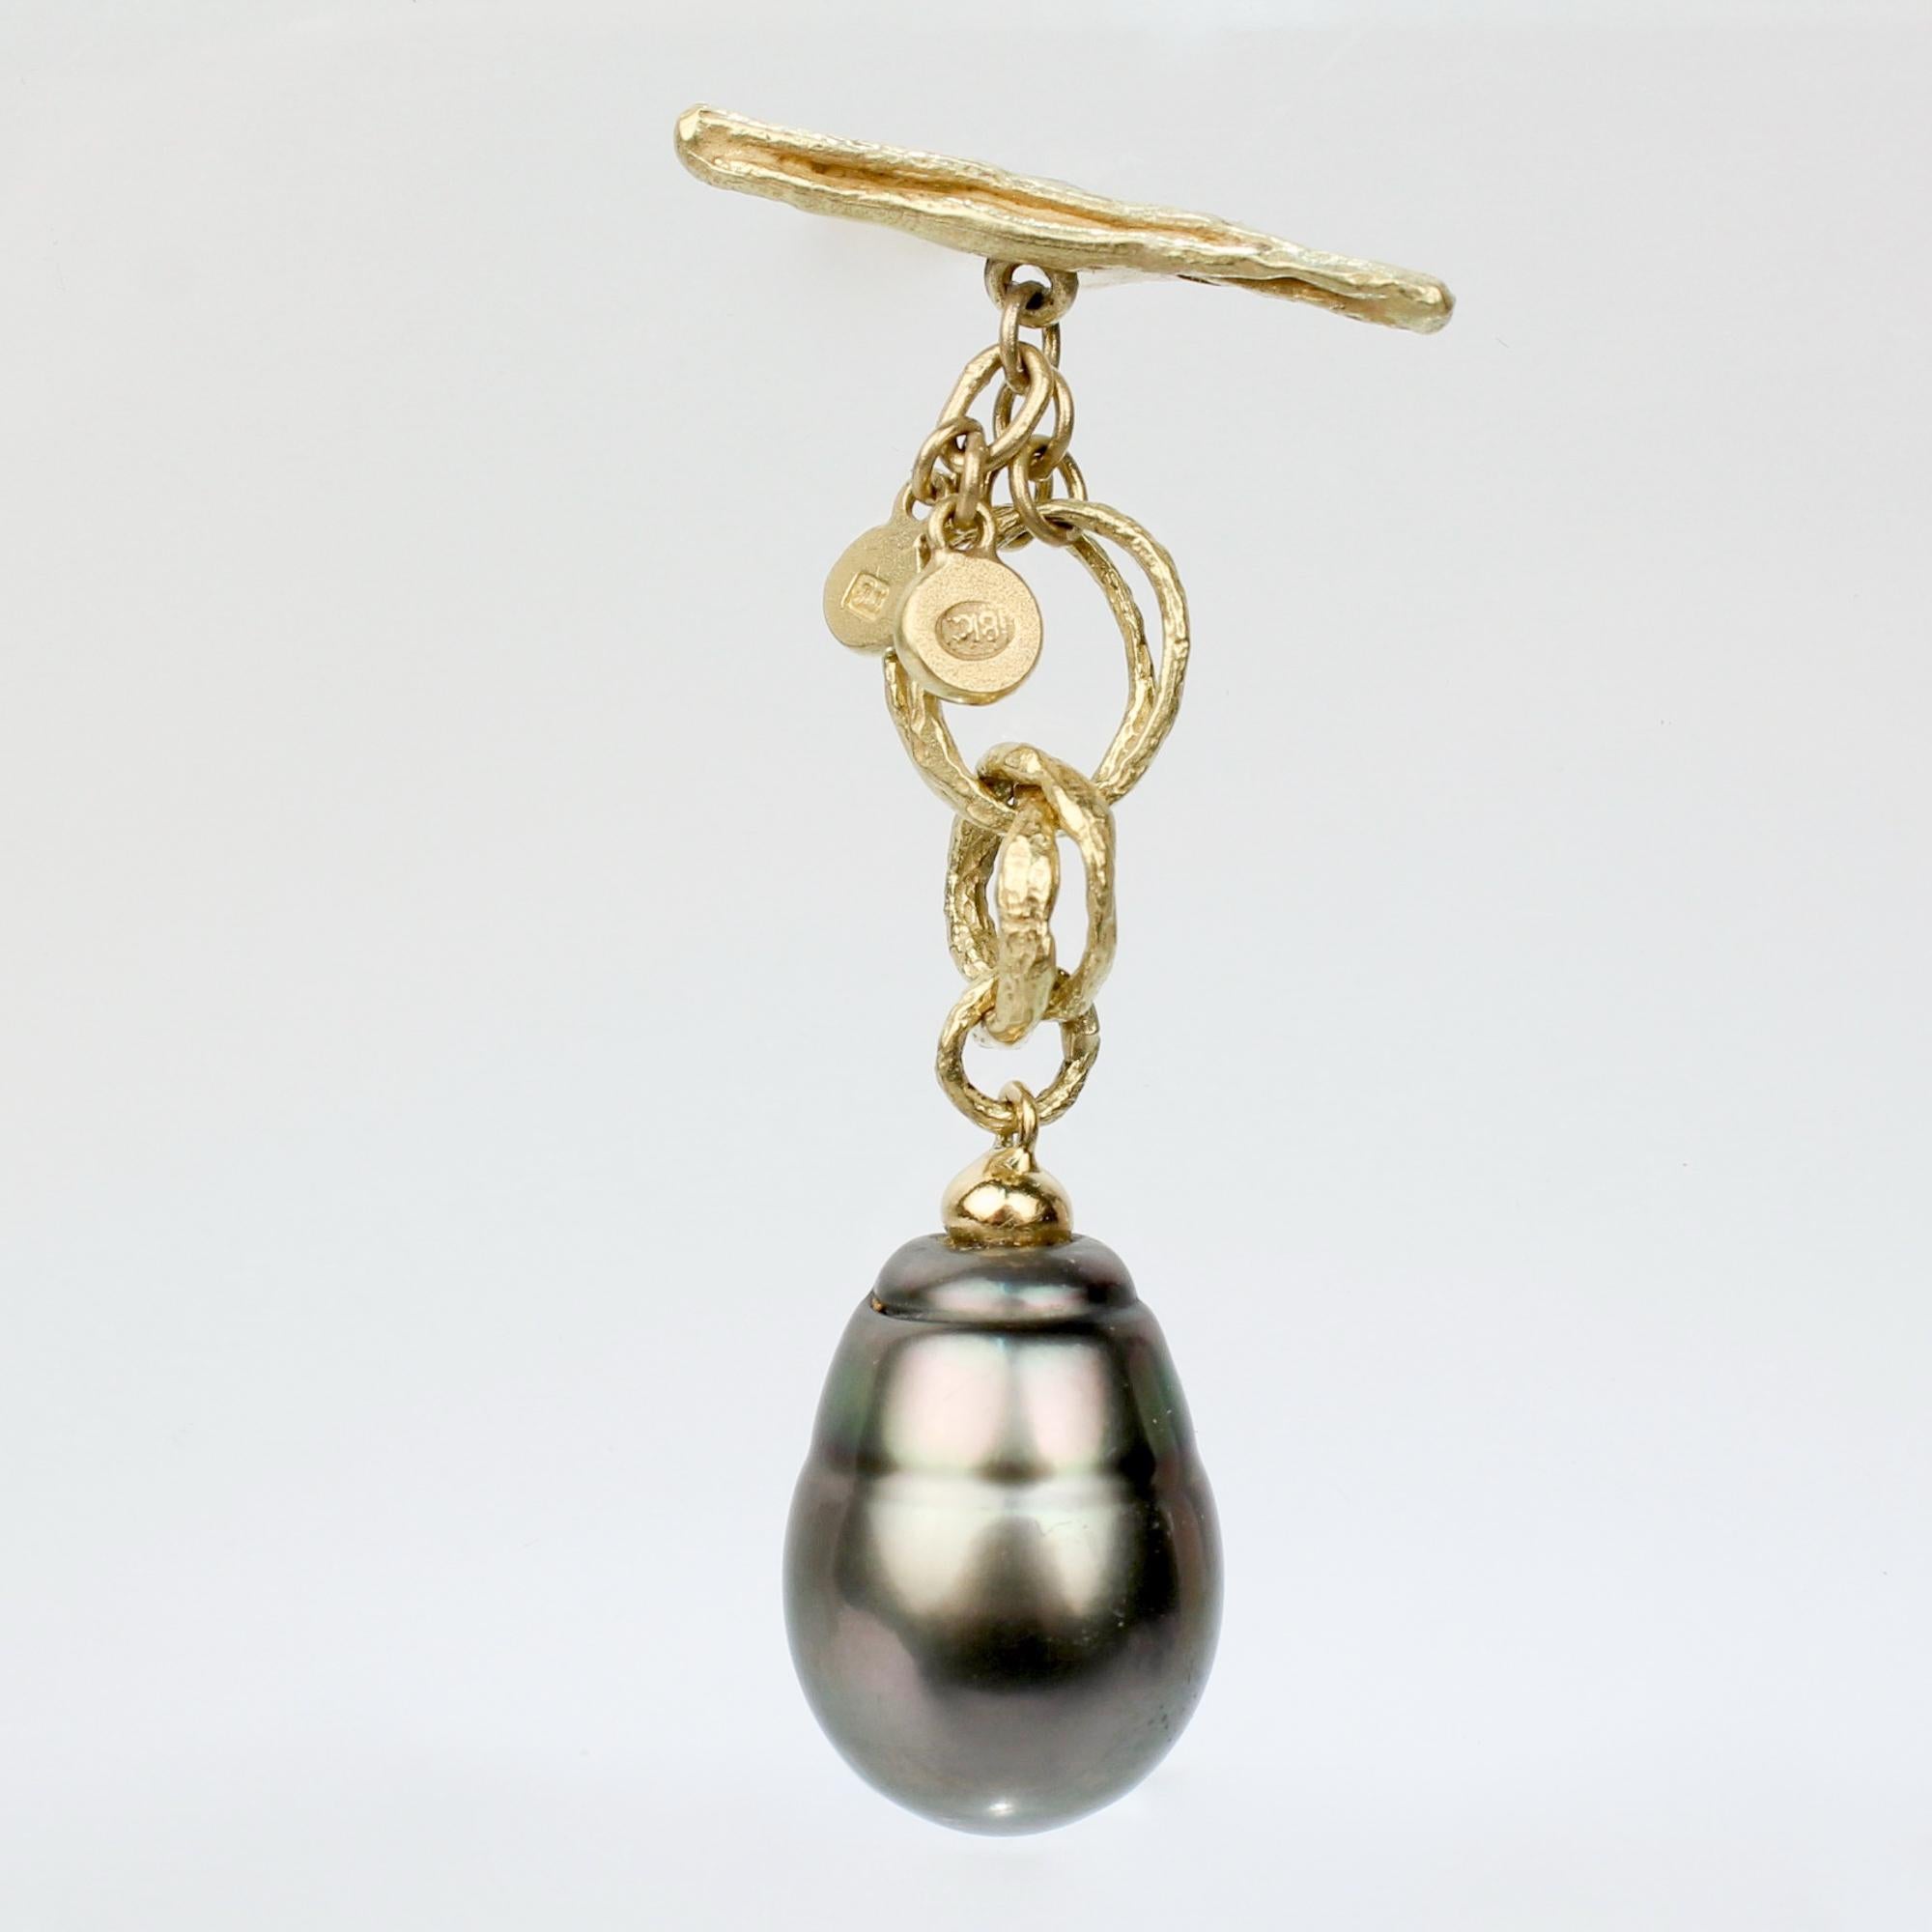 Signed 18 Karat Gold & Large Baroque Tahitian Pearl Lapel Button or Fob In Good Condition For Sale In Philadelphia, PA